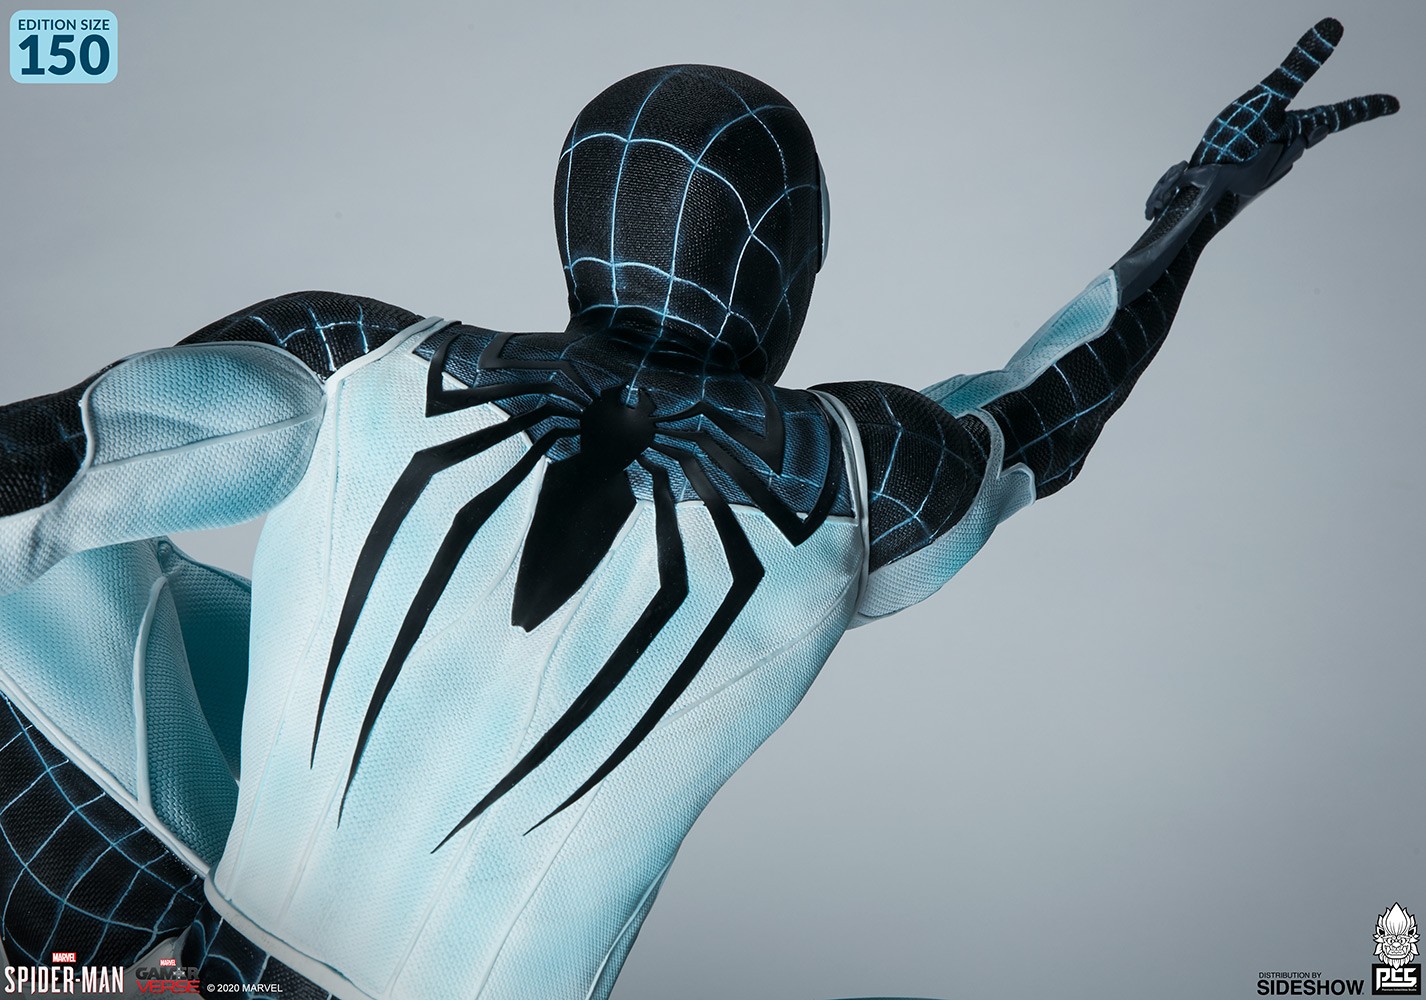 Spider-Man Negative Zone Suit Exclusive Edition (Prototype Shown) View 18